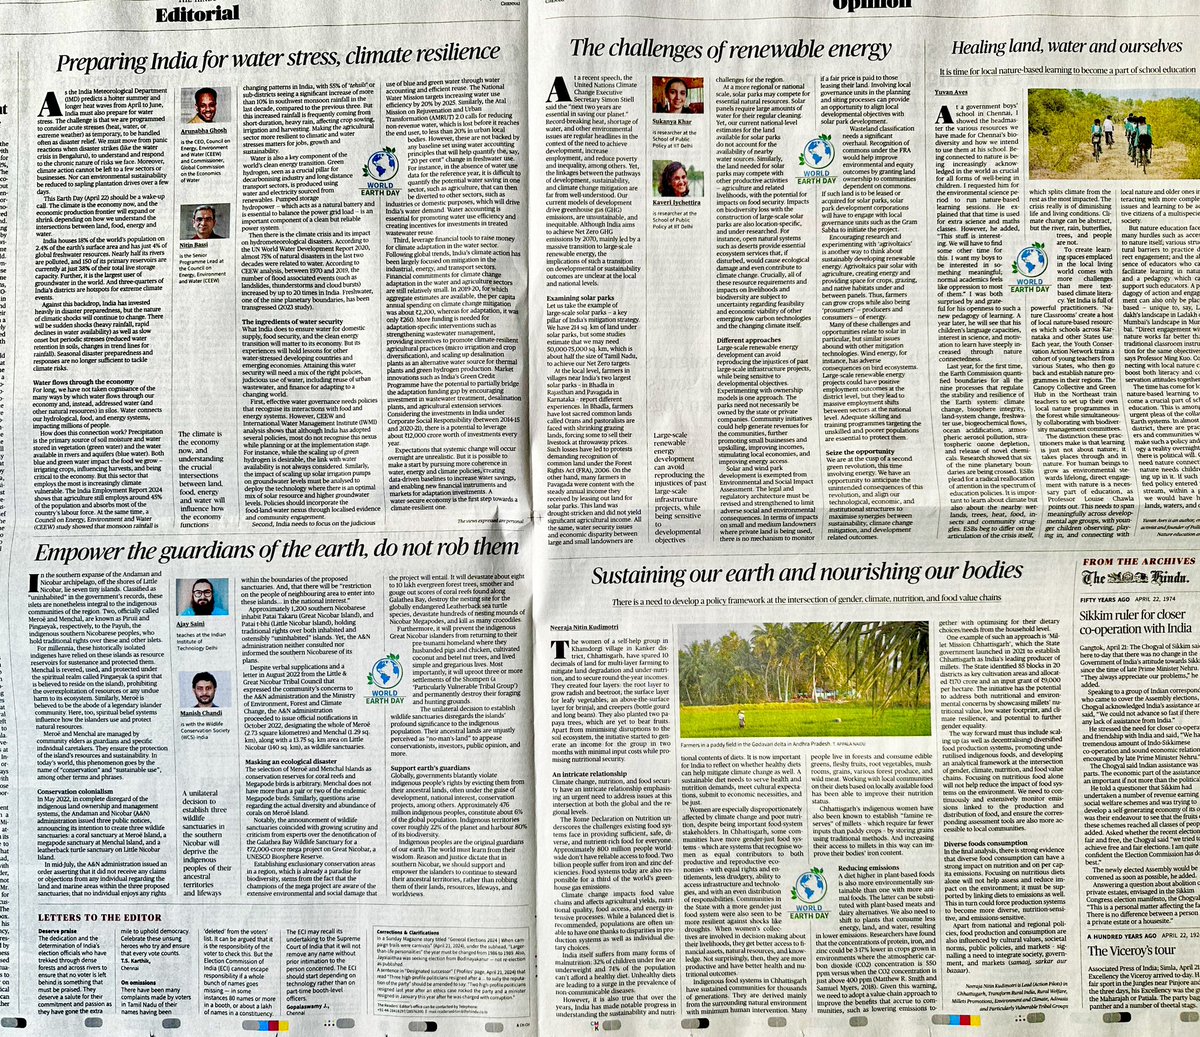 Happy #EarthDay2024 to all of us - and the planet! #ThematicPages @the_hindu With thanks to the experts who wrote for us on this day and to @radhikasan and Murali Krishnaswamy for superb editing as always.